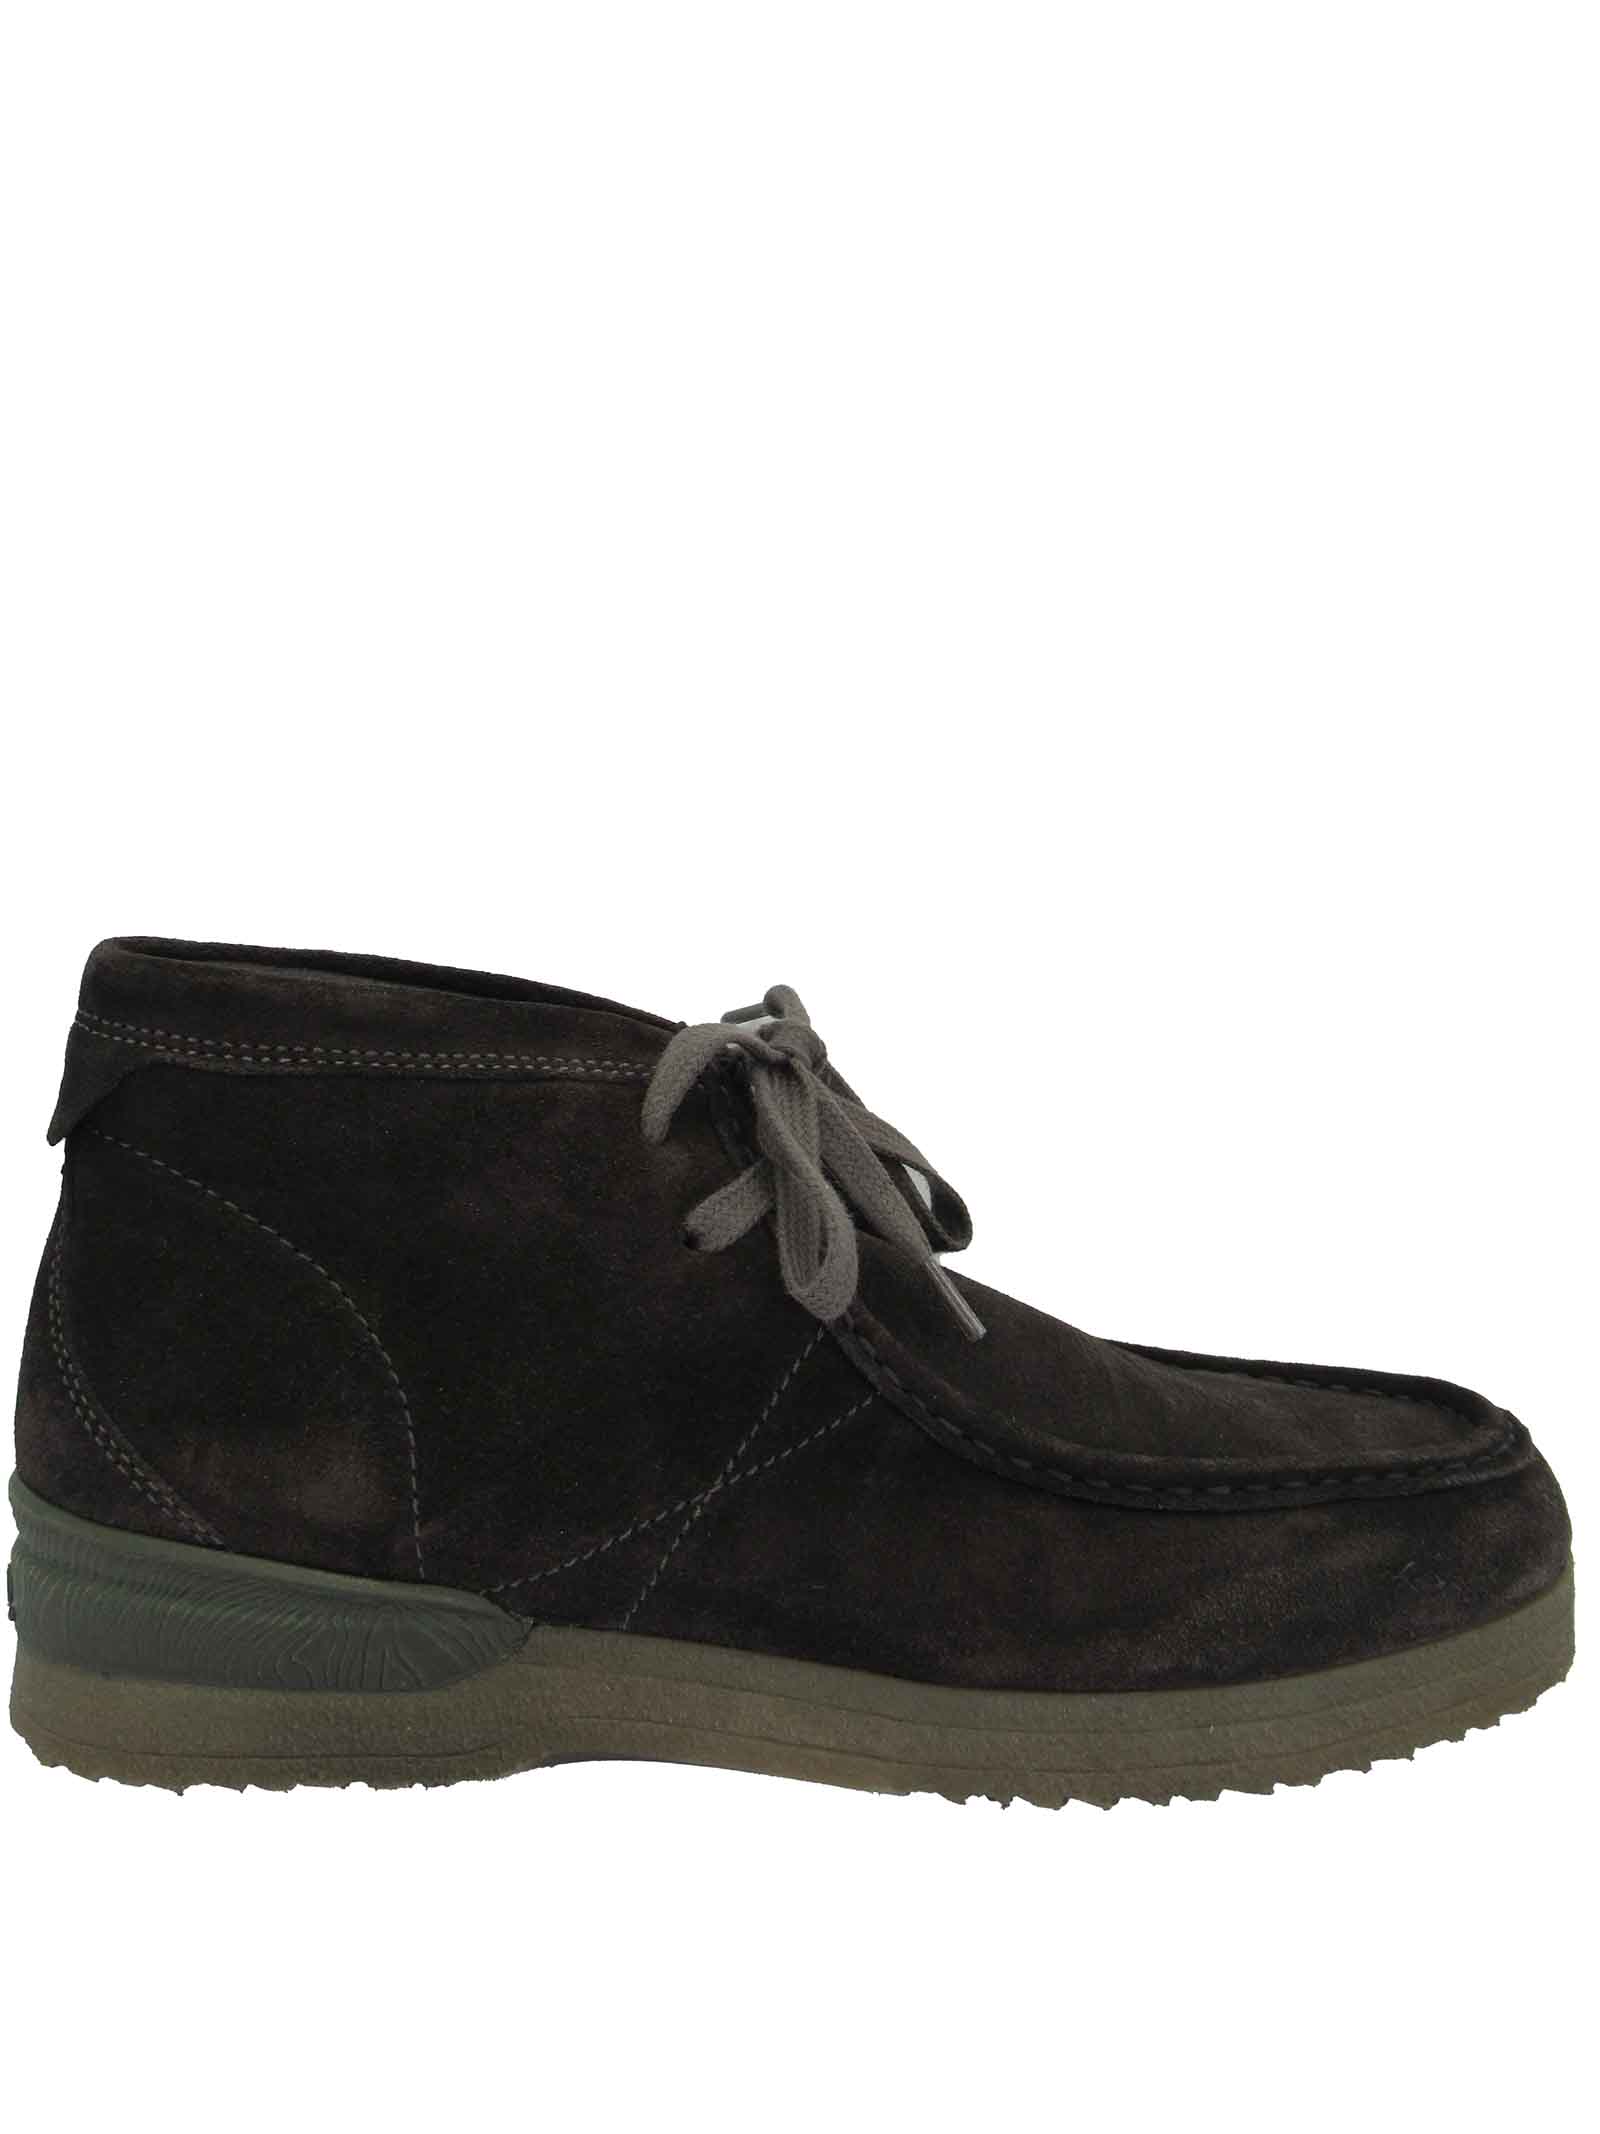 Men's Footwear Ankle Boots in Mud Suede with Stitching and Para Sole